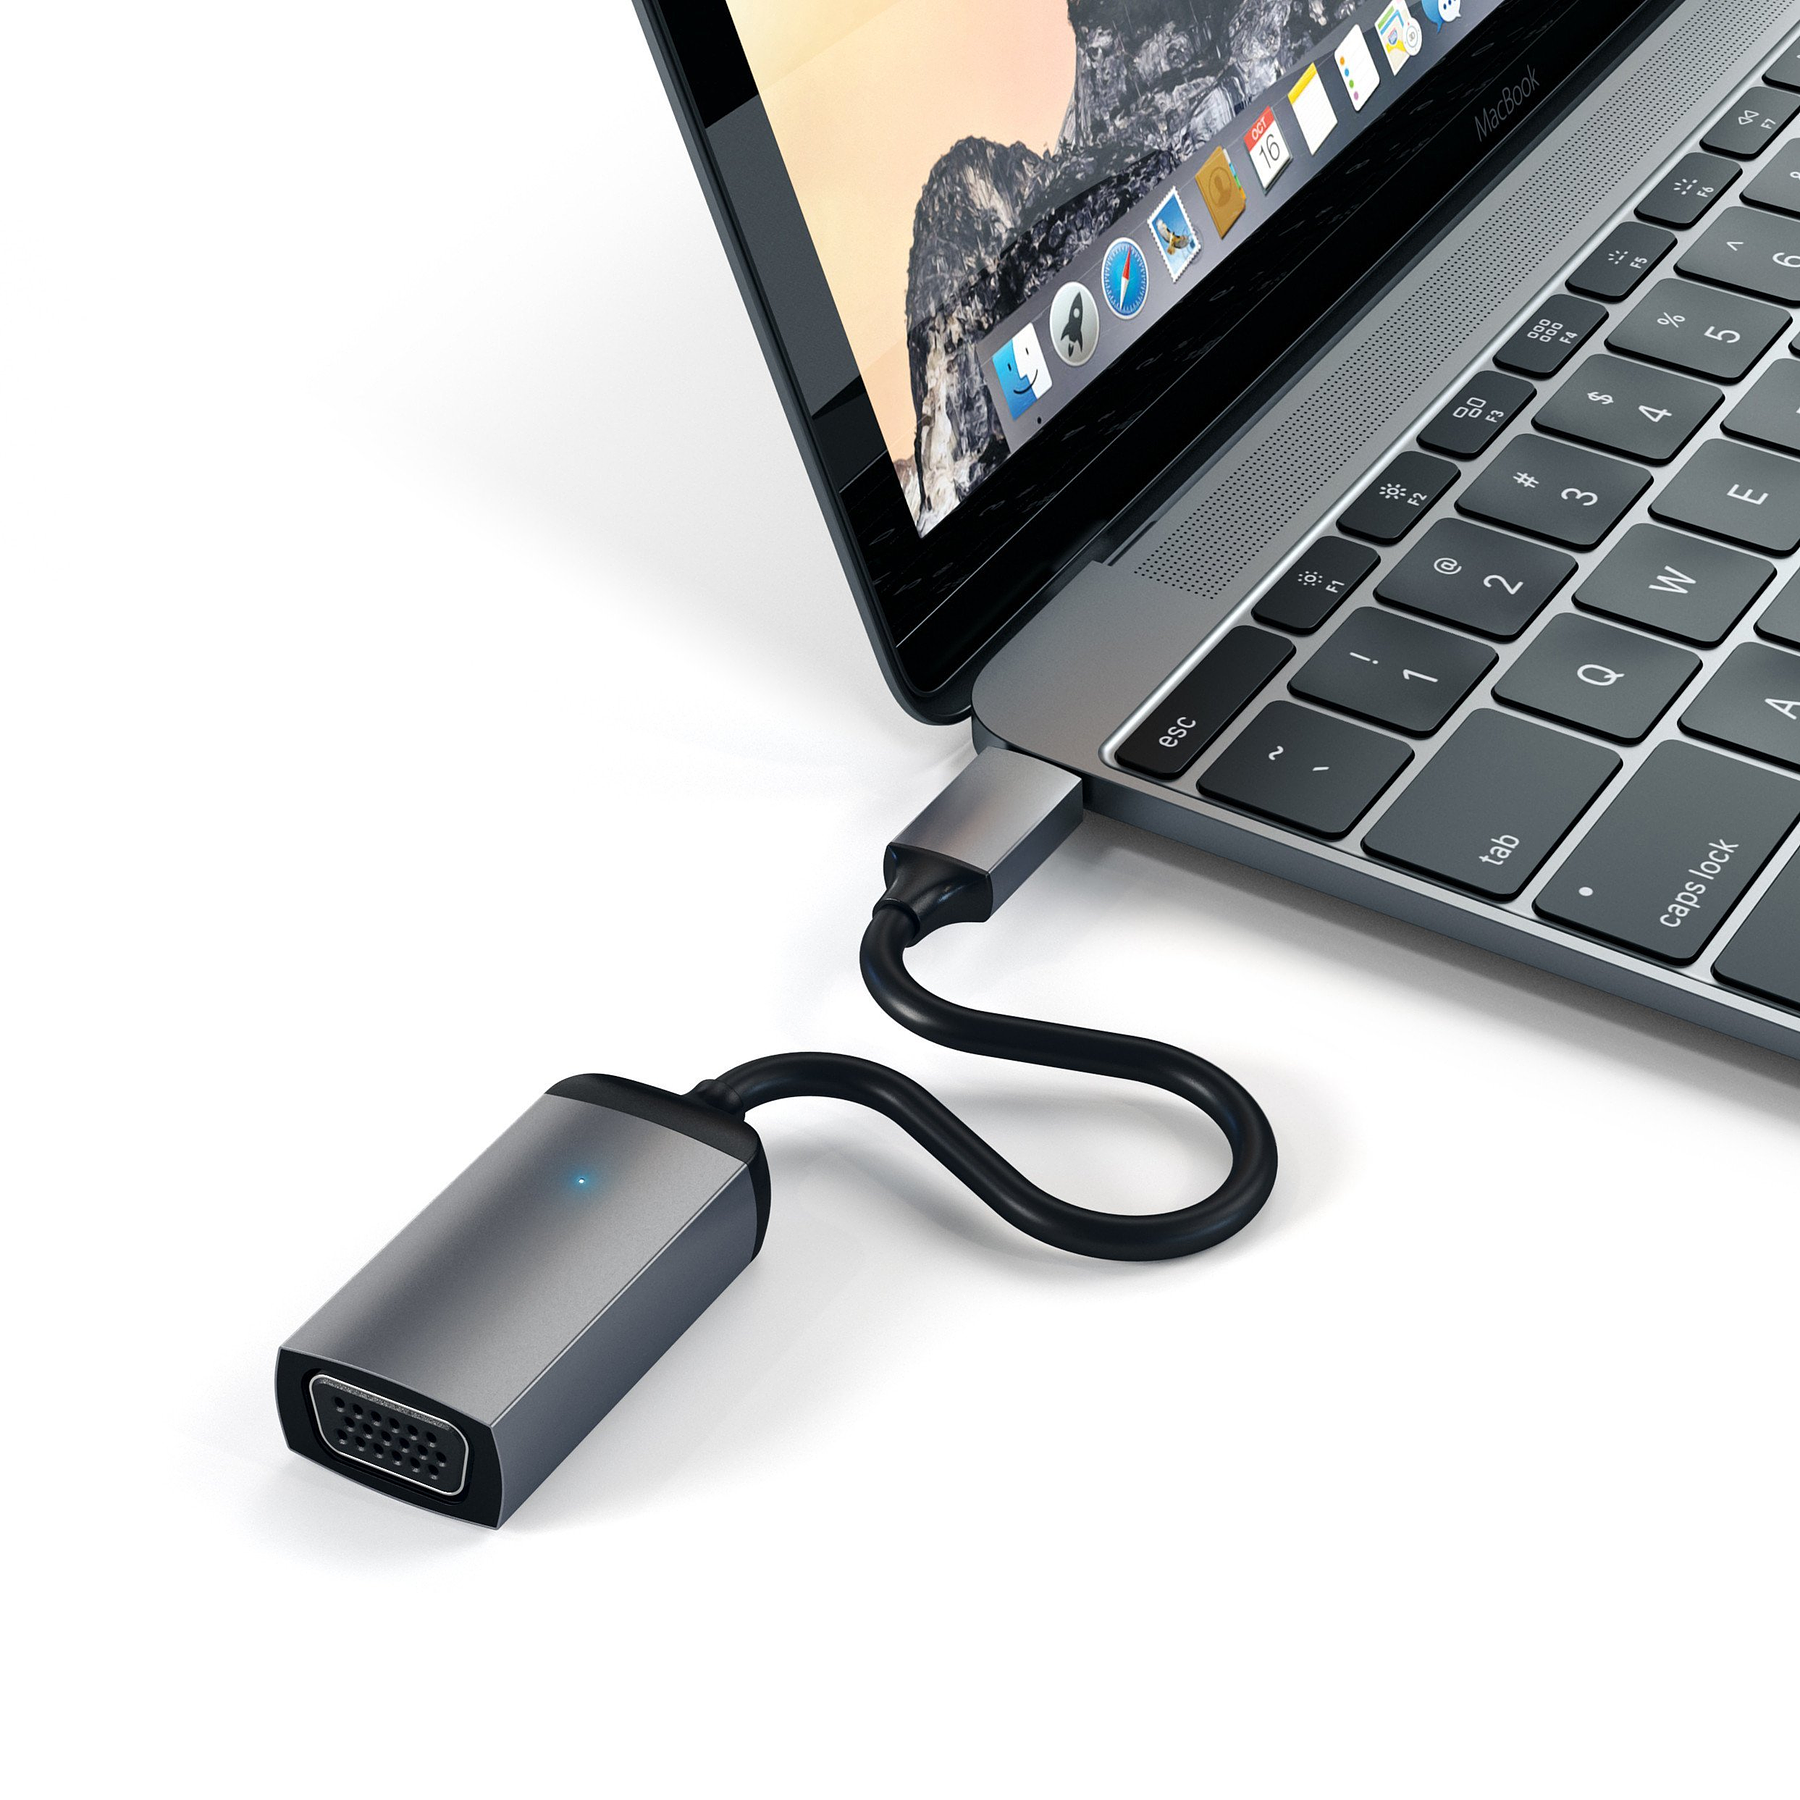 Satechi - USB-C to VGA adapter (space grey)